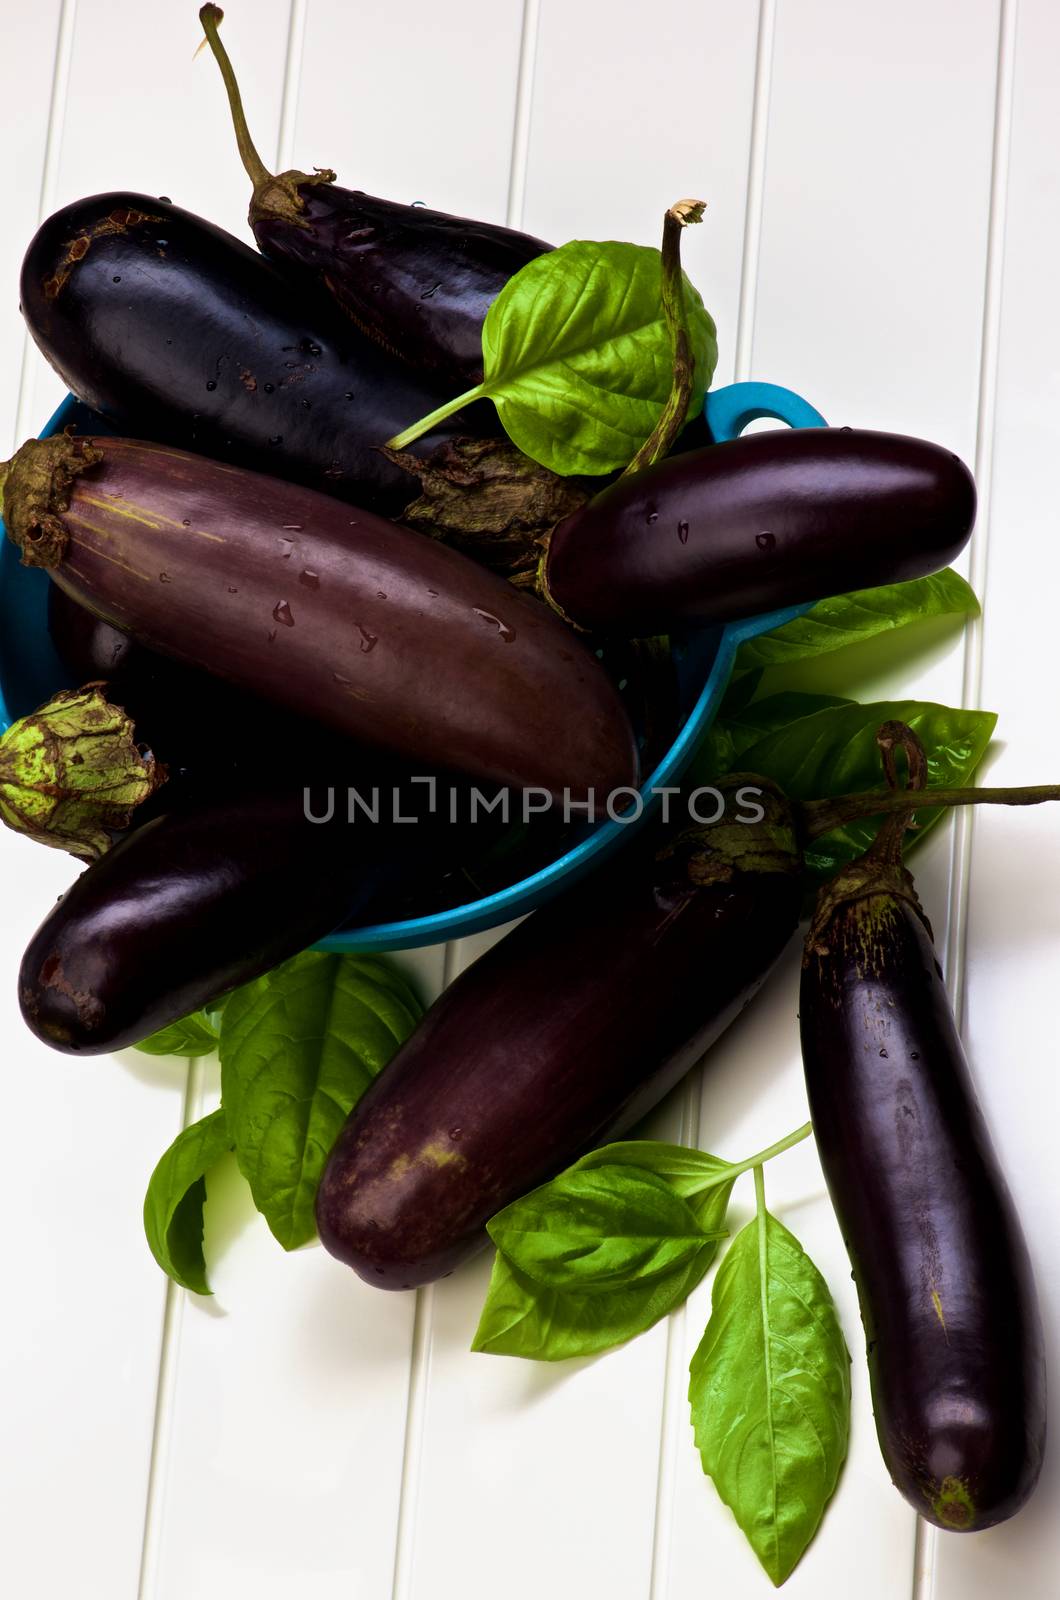 Arrangement of Fresh Raw Small Eggplants with Basil Leafs in Blue Colander closeup on White Plank background